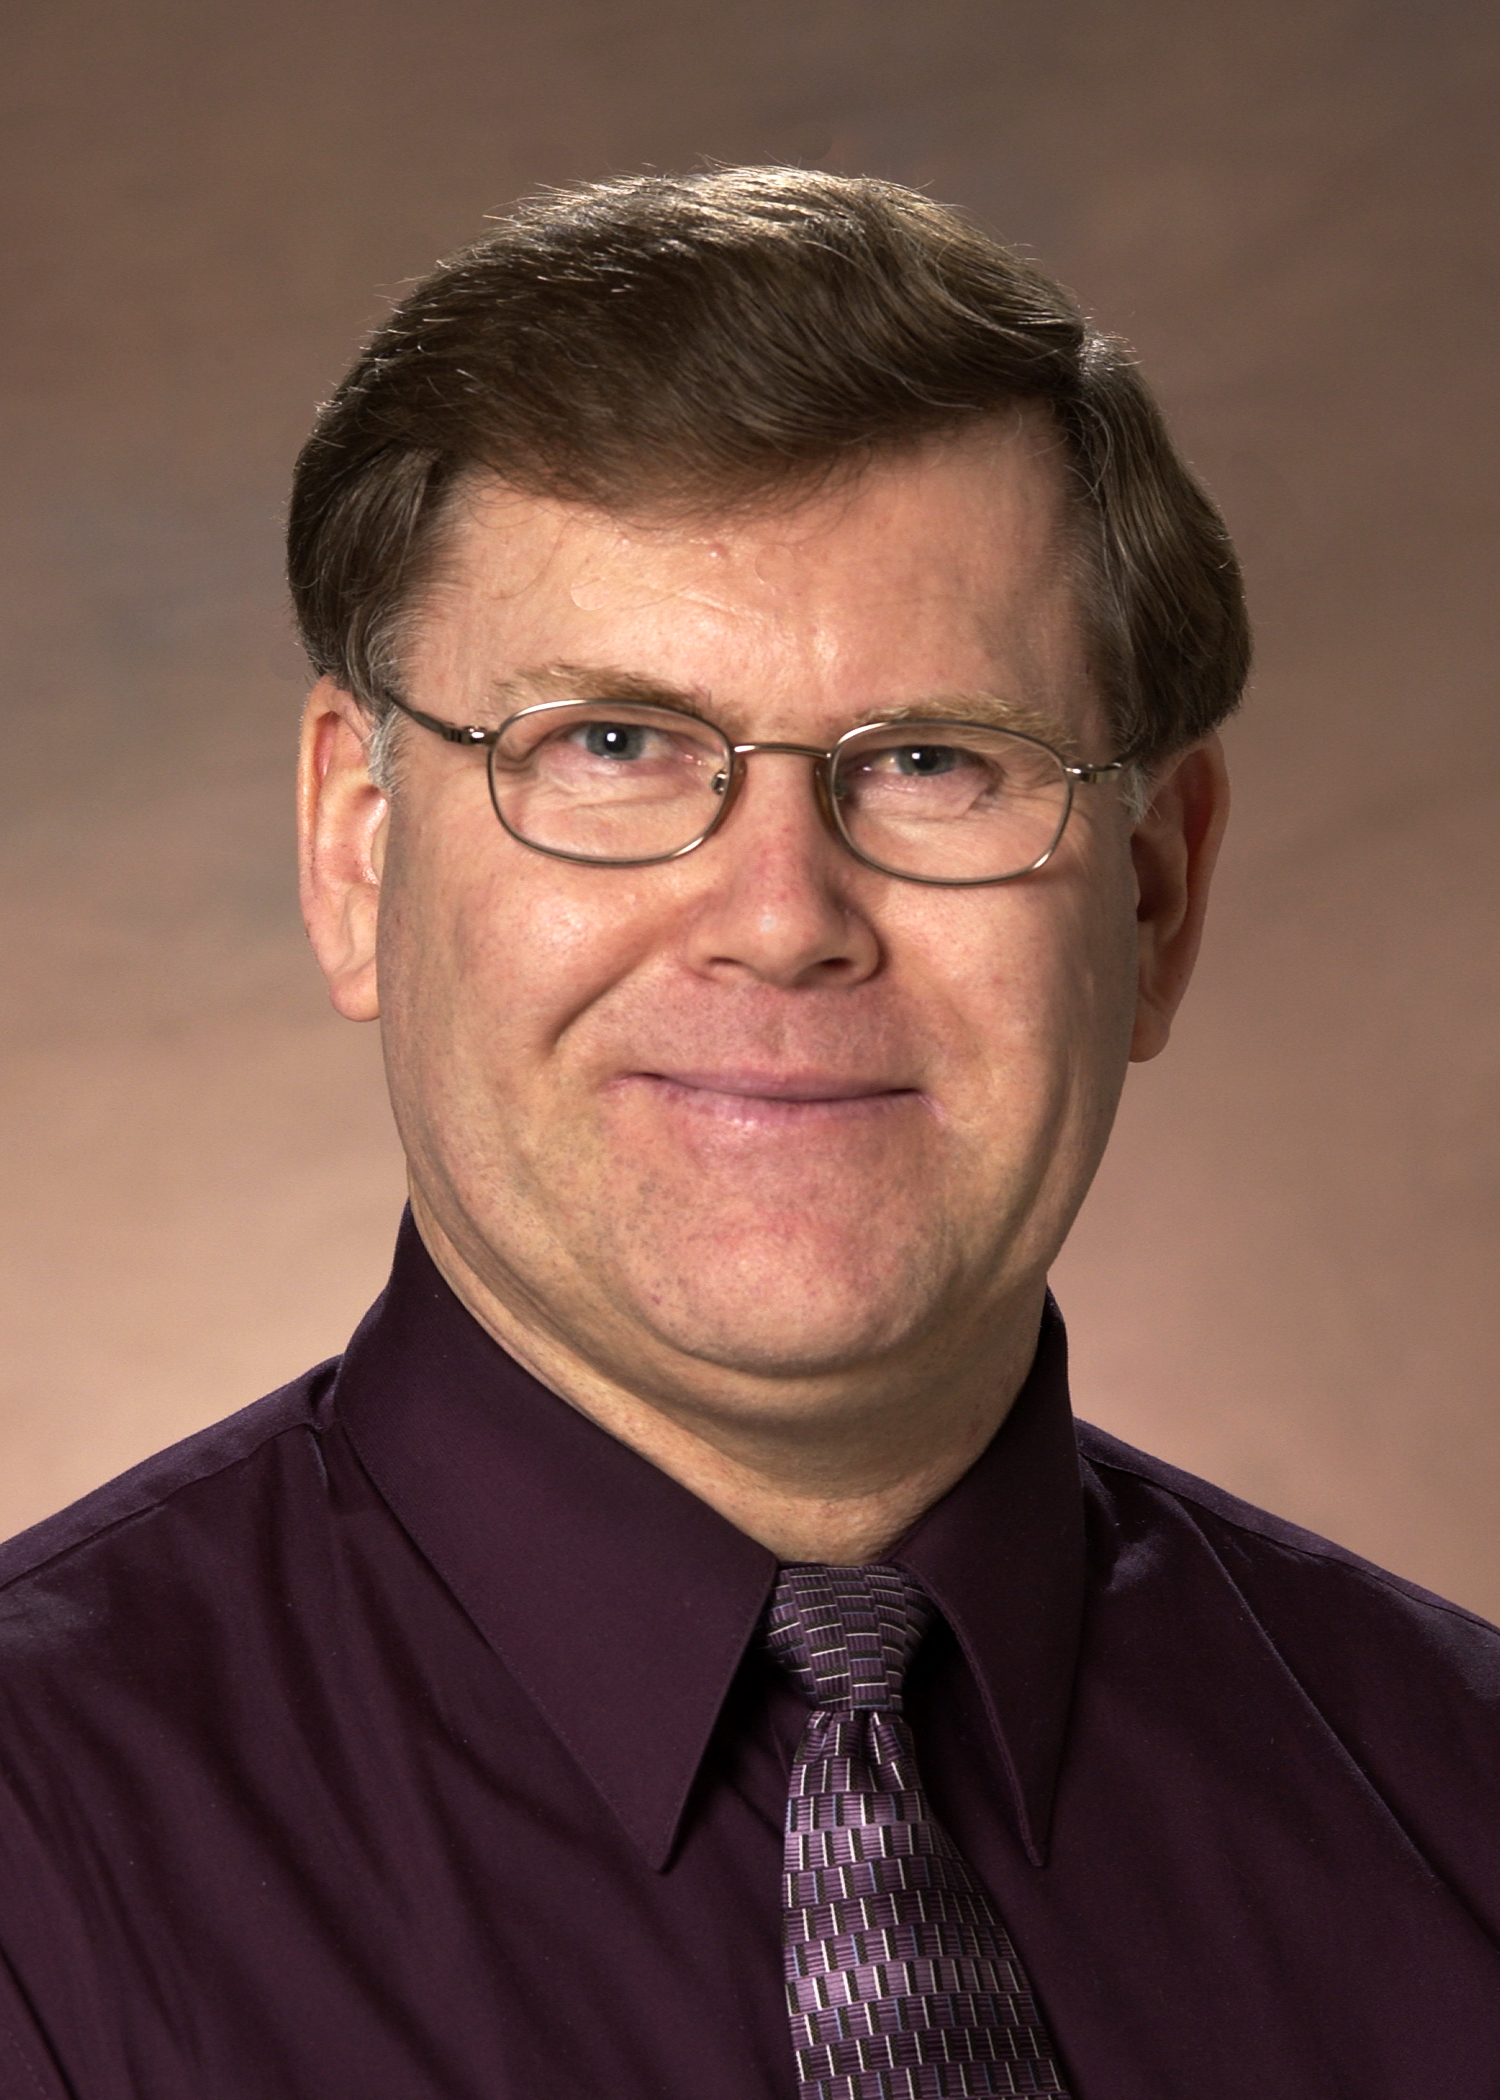 The American Society of Agricultural and Biological Engineers awards its top honor to Ken Hellevang, NDSU professor and Extension agricultural engineer.